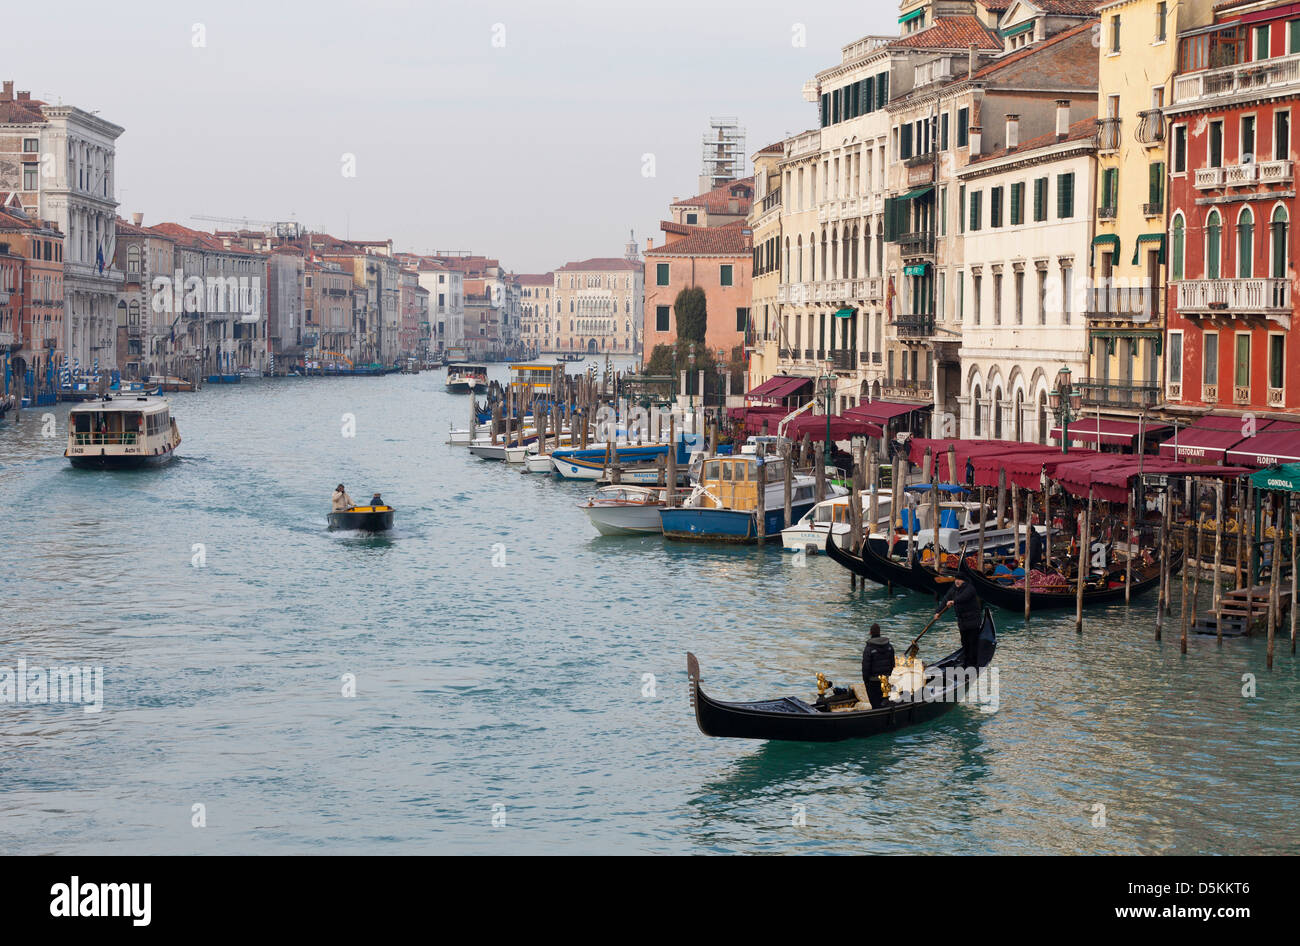 The Grand Canal  the major waterway and main street of the historic Renaissance city of Venice. Stock Photo